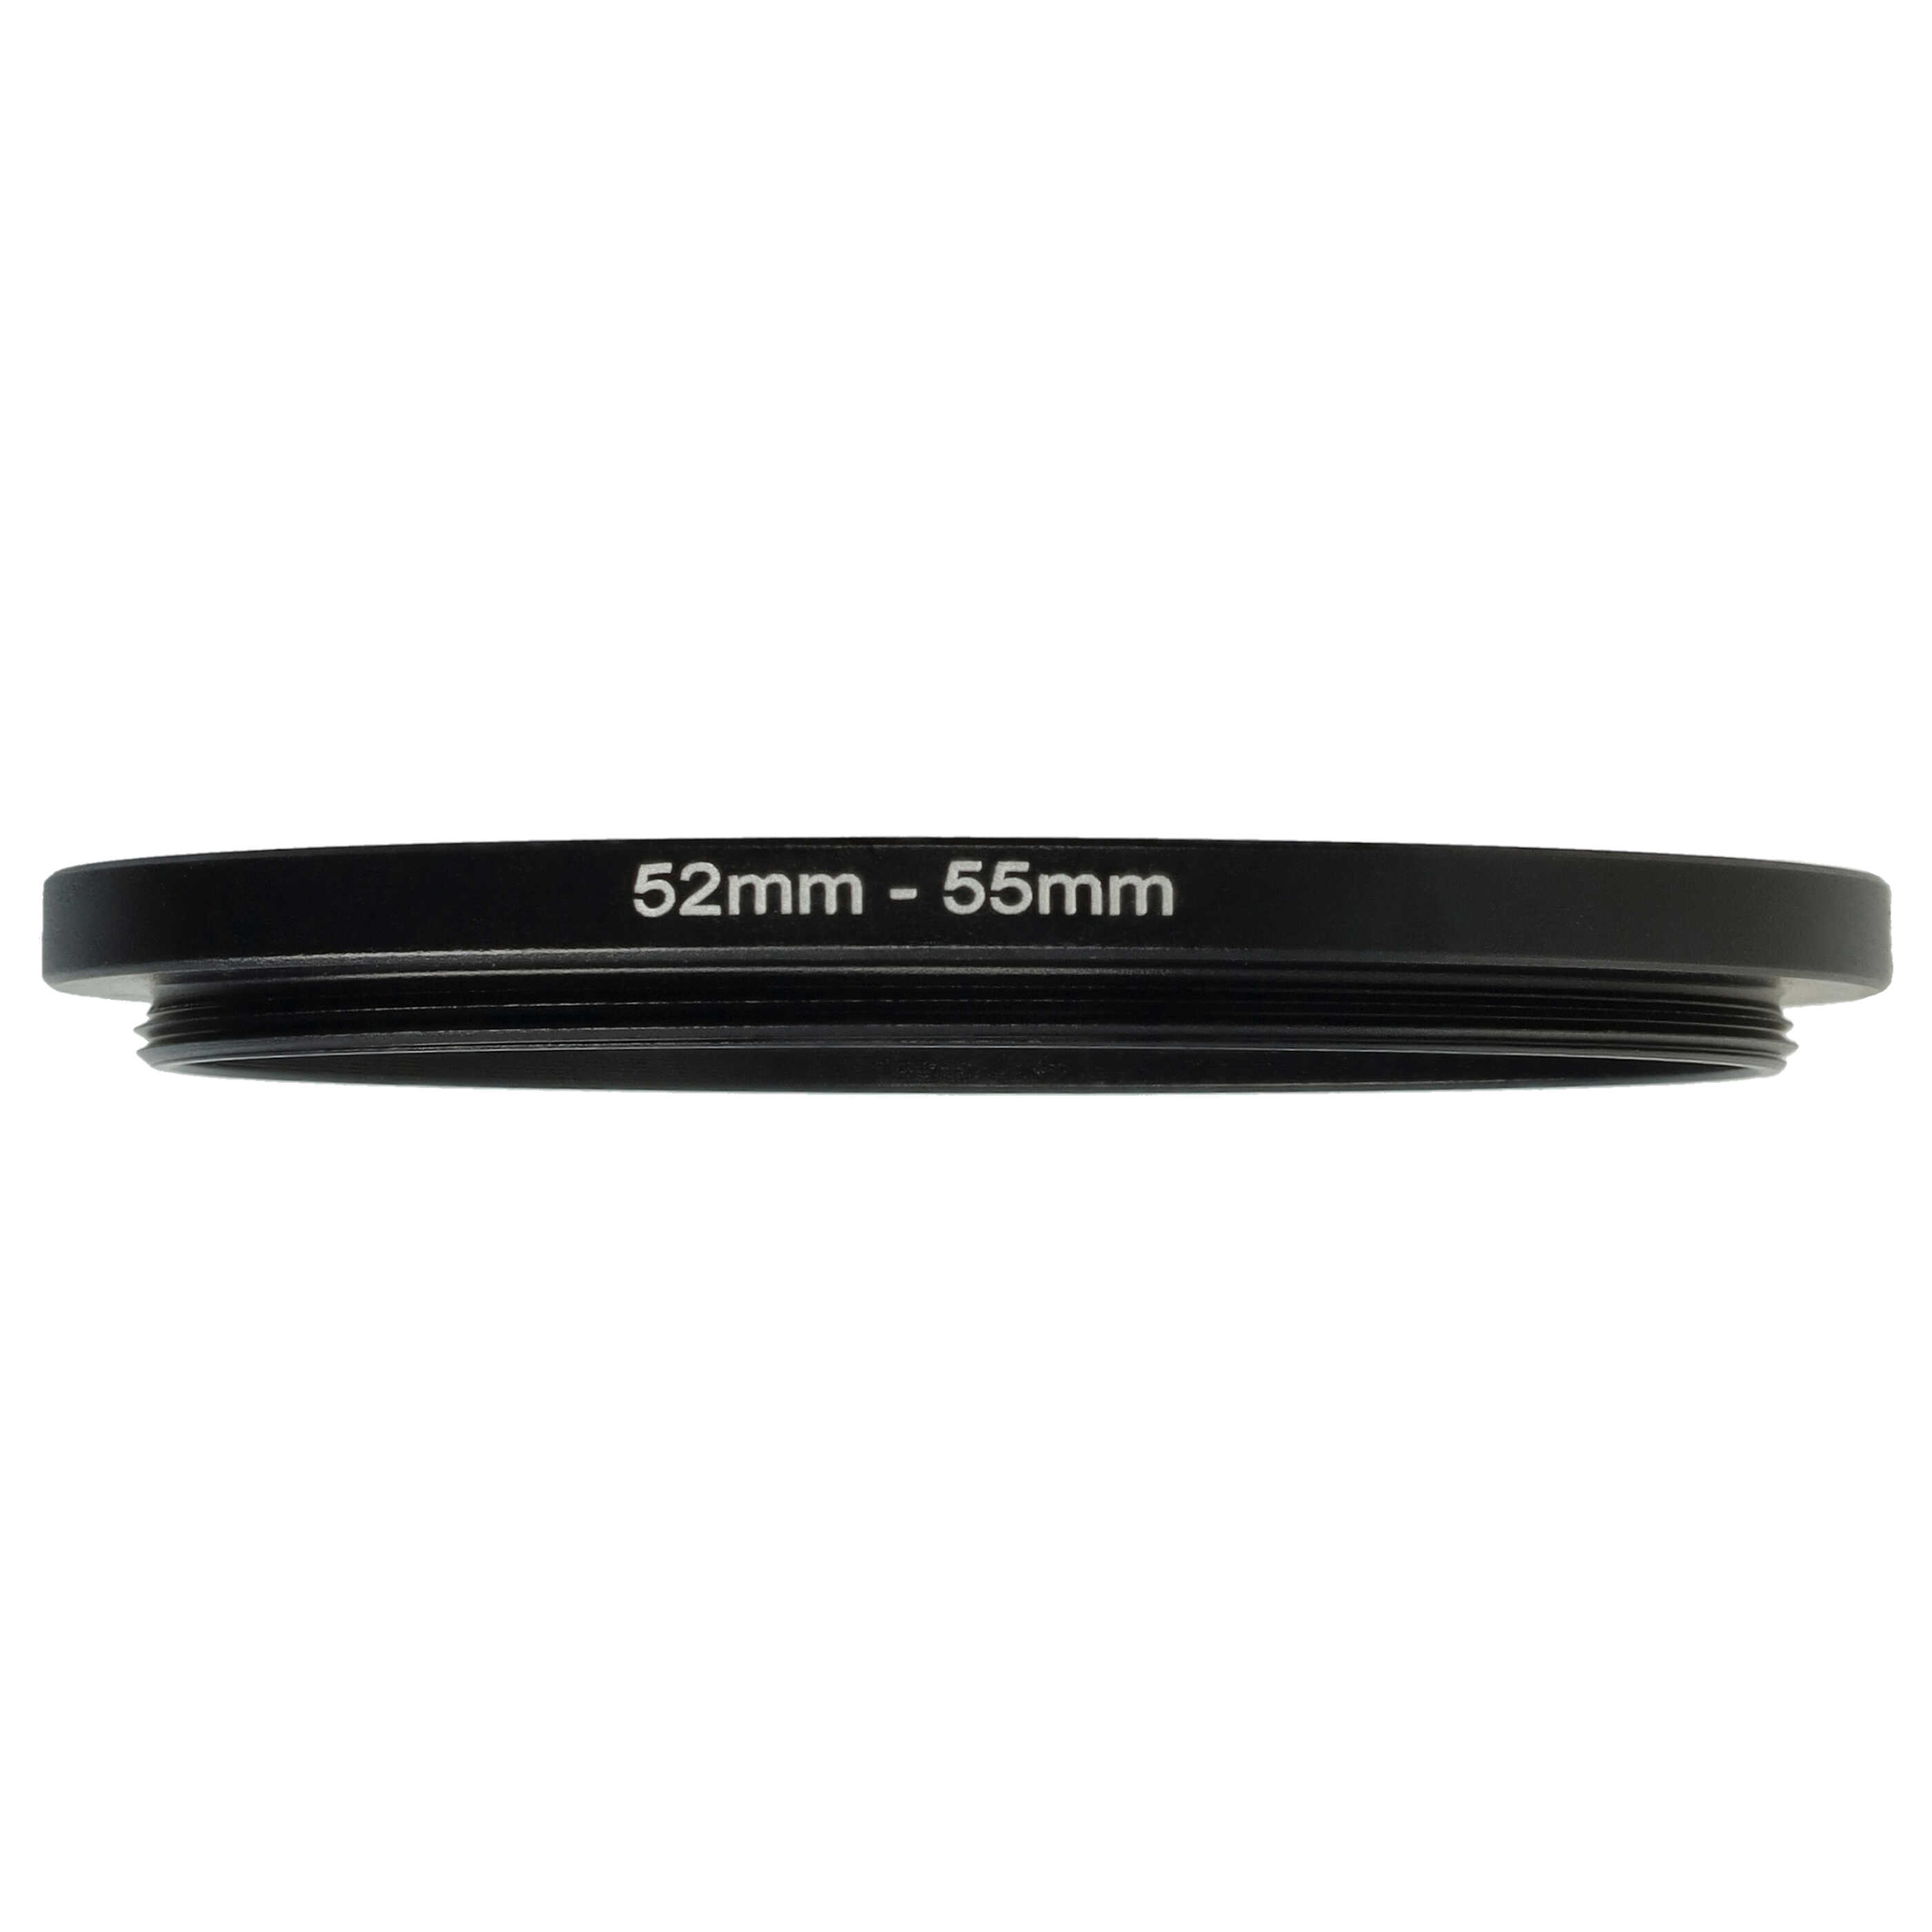 Step-Up Ring Adapter of 52 mm to 55 mmfor various Camera Lens - Filter Adapter